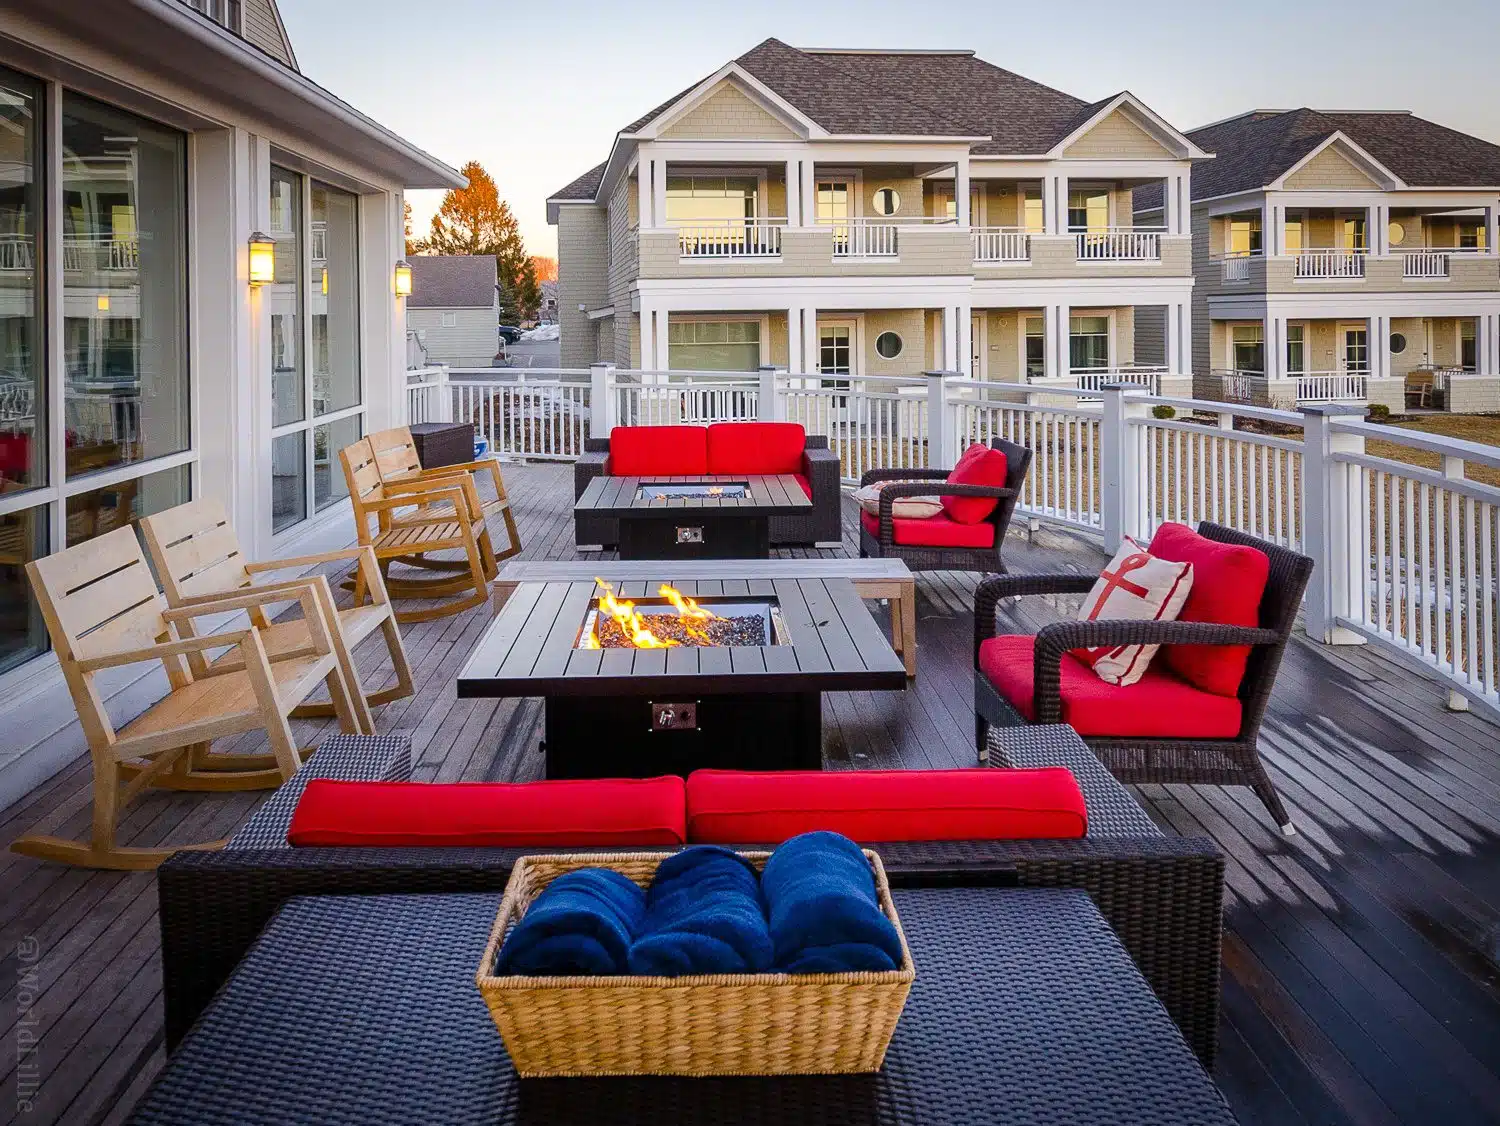 Inn by the Sea Maine Resort: Outdoor firepit patio